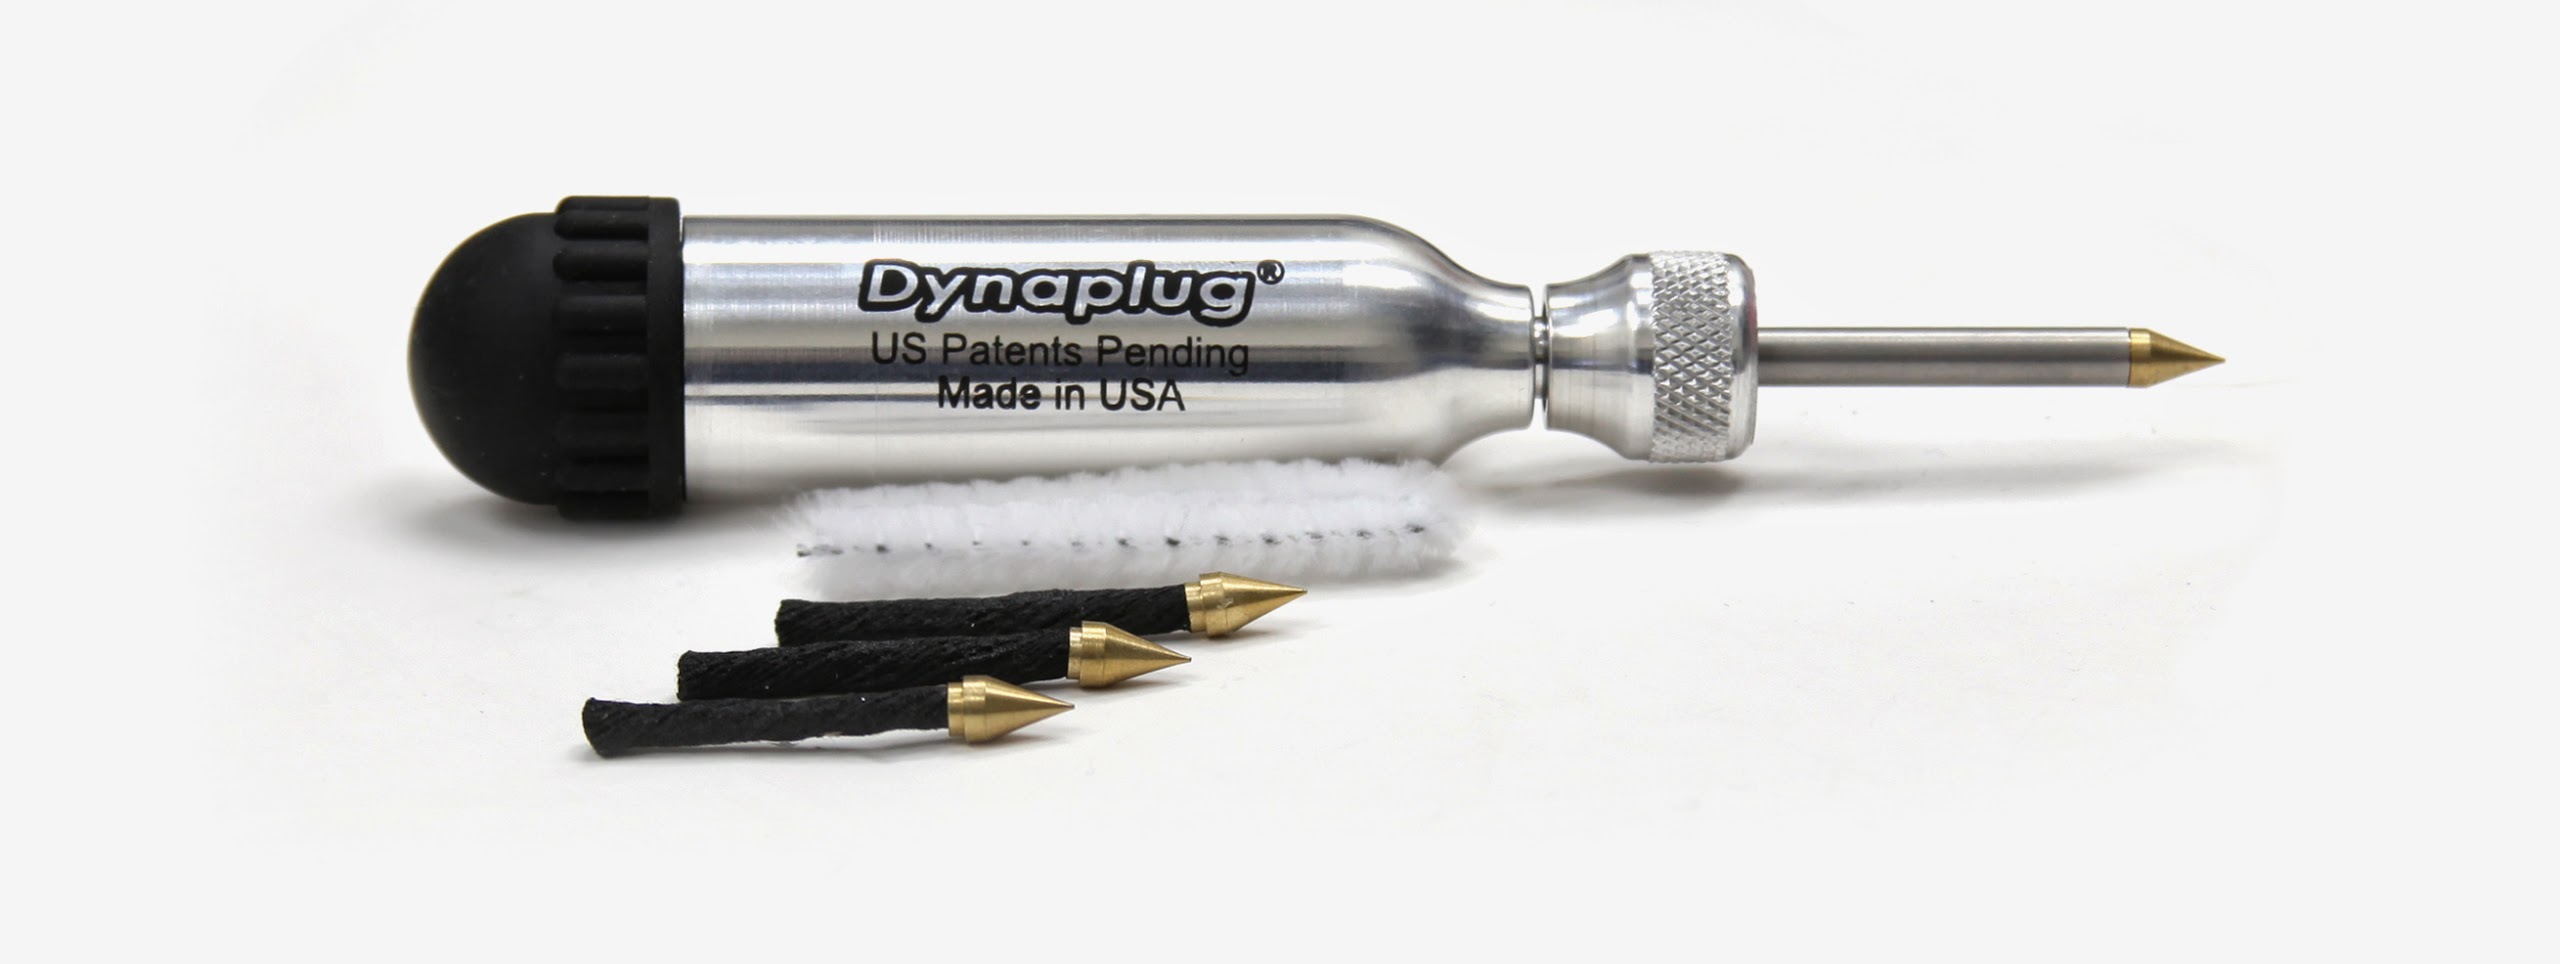 Dynaplug Ultralite Tubeless Tire Repair Kit for your BMW